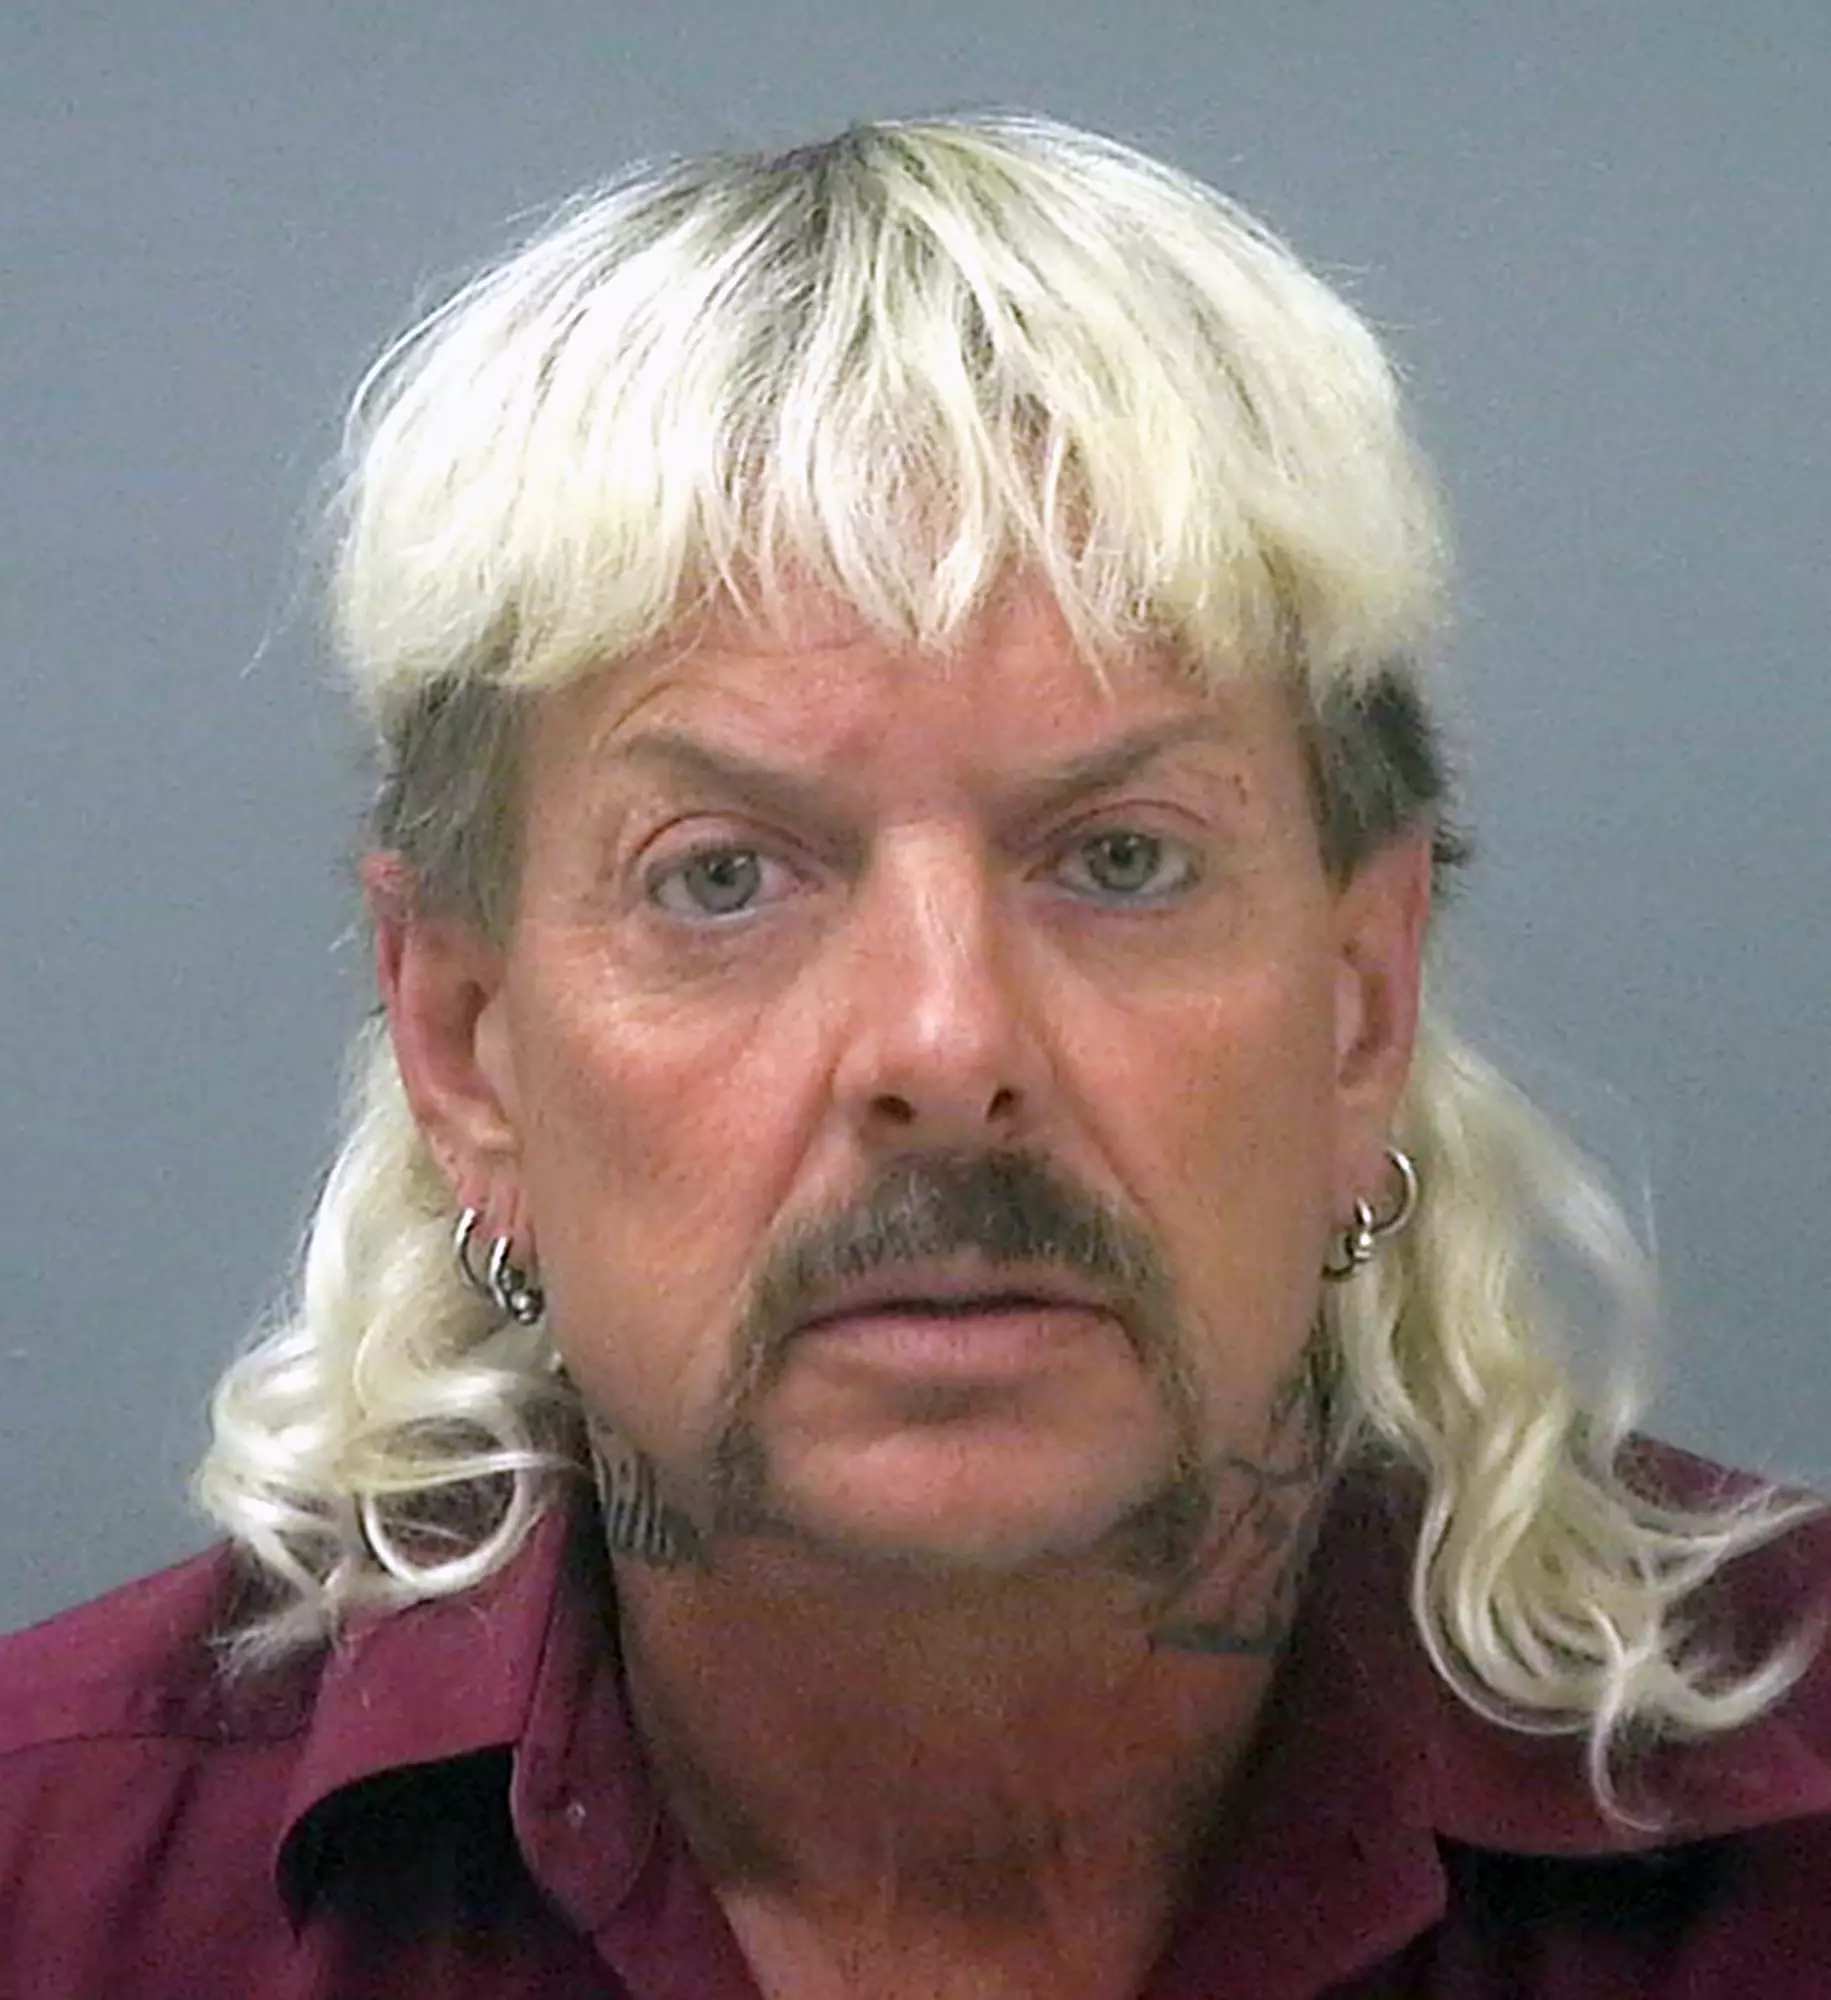 Joe Exotic claims he may be dead in 'two to three months'.